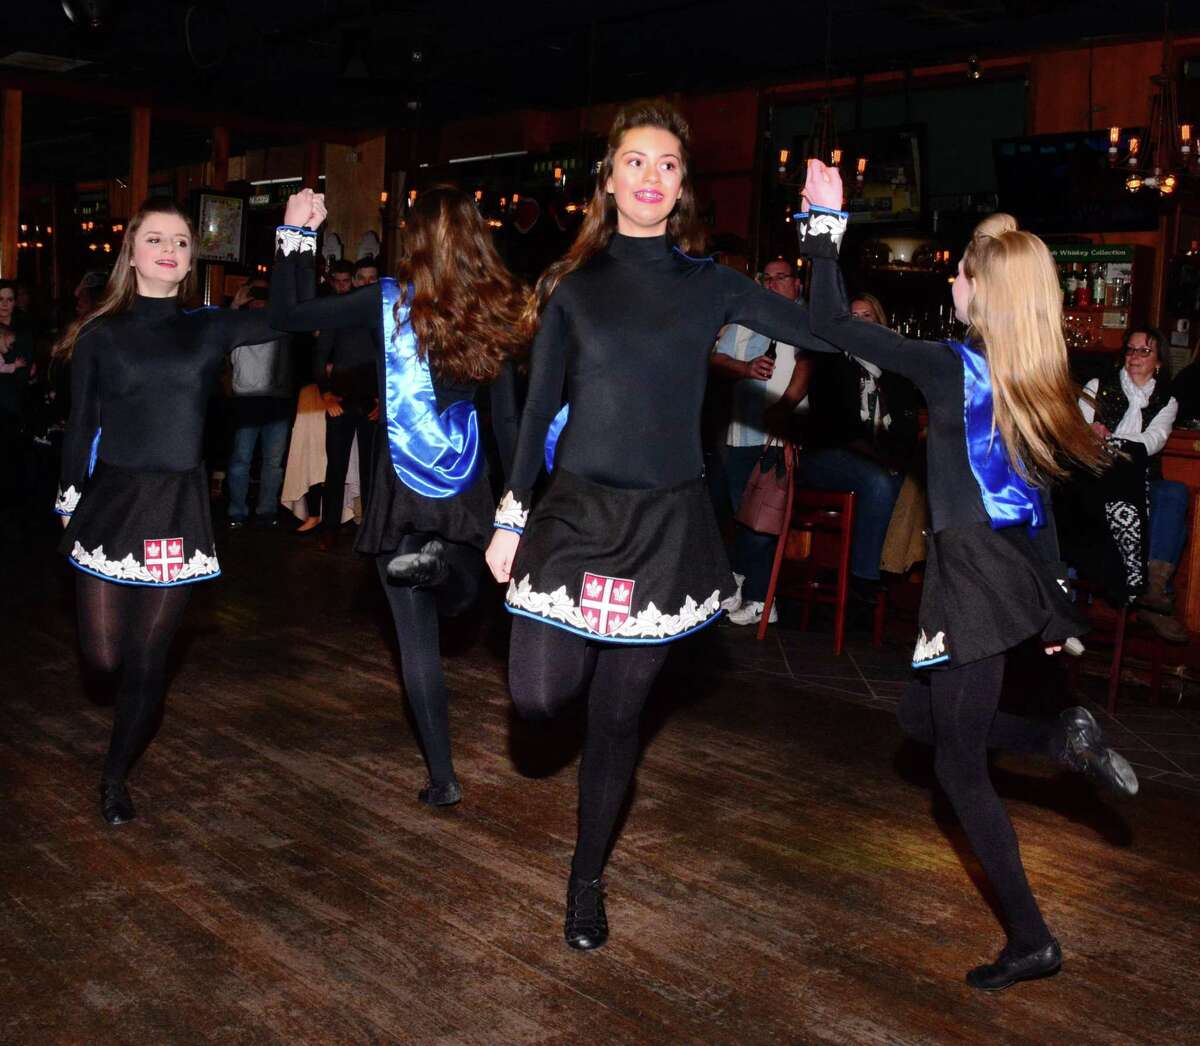 Ashurst Academy Irish Dancers perform during Molly Darcy's 25th annual St. Patrick's Day Parade Fundraiser on Sunday February 10, 2019.